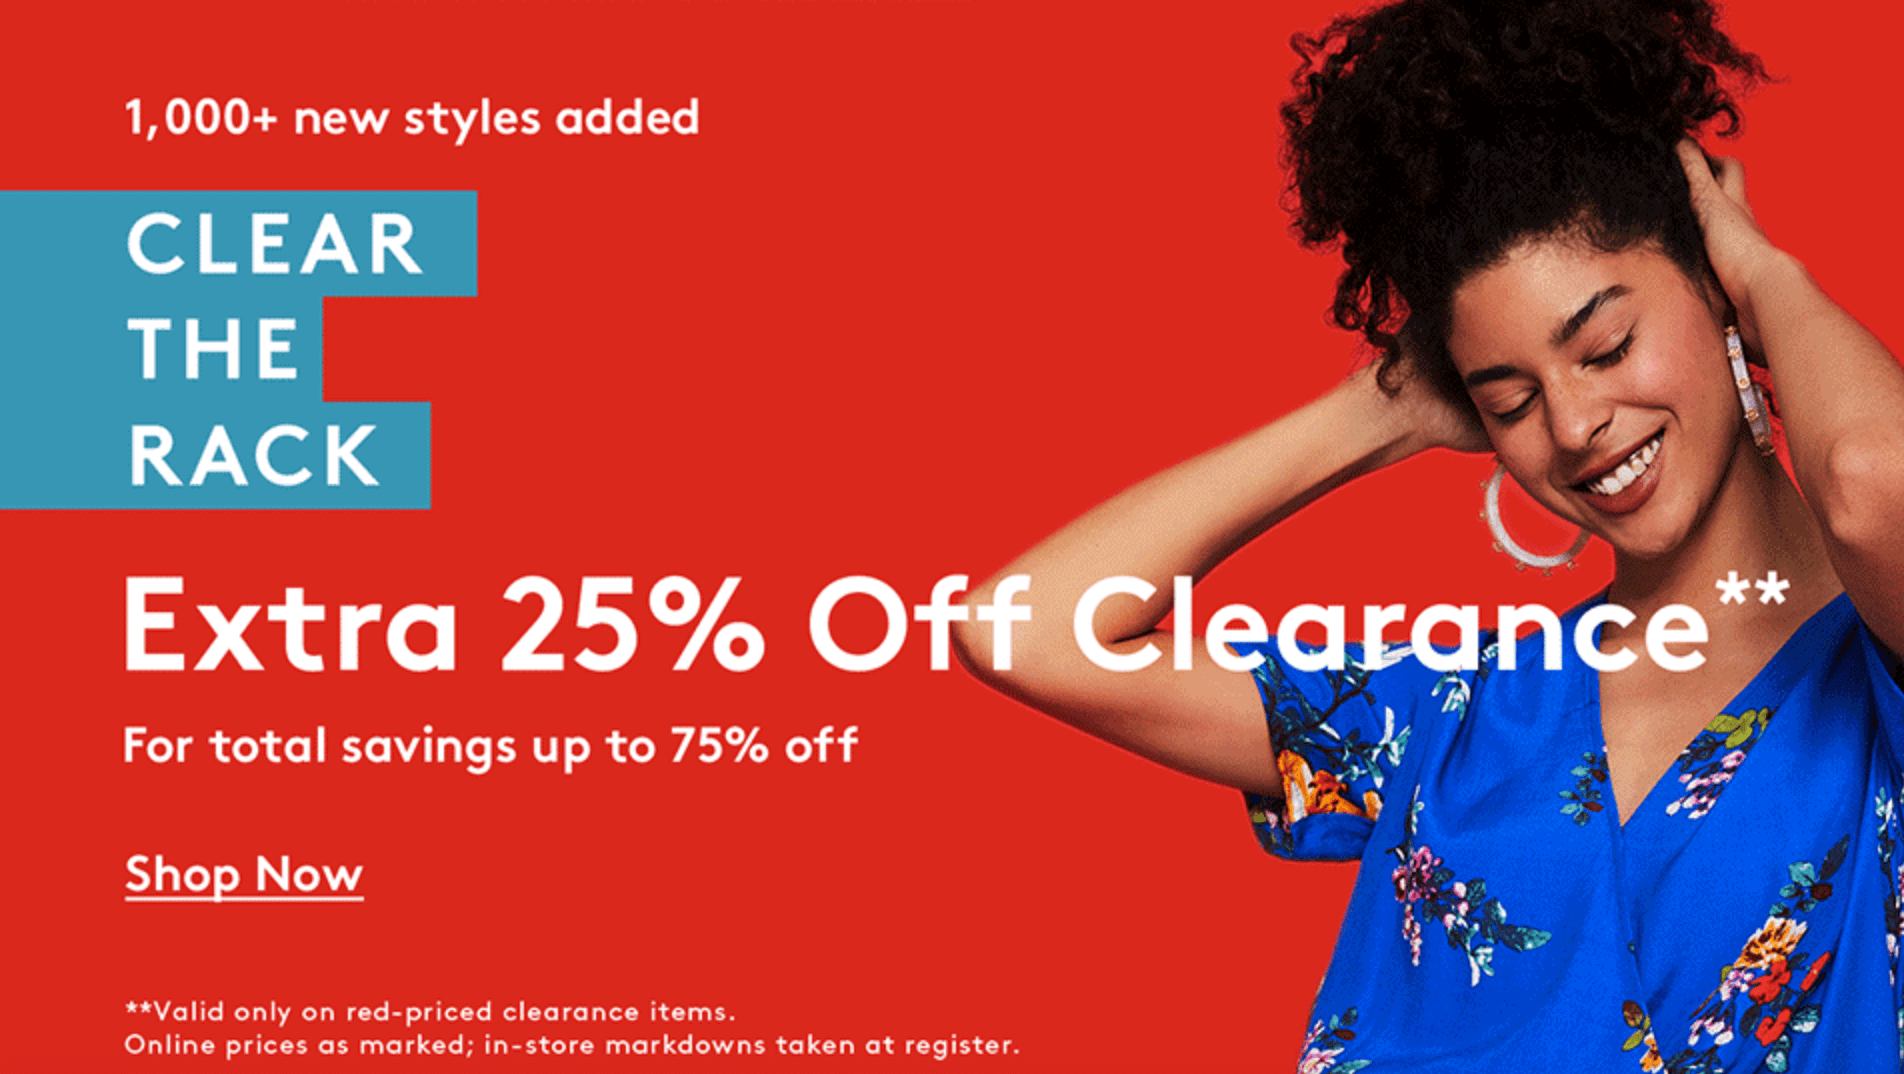 25% OFF Nordstrom Rack Coupons